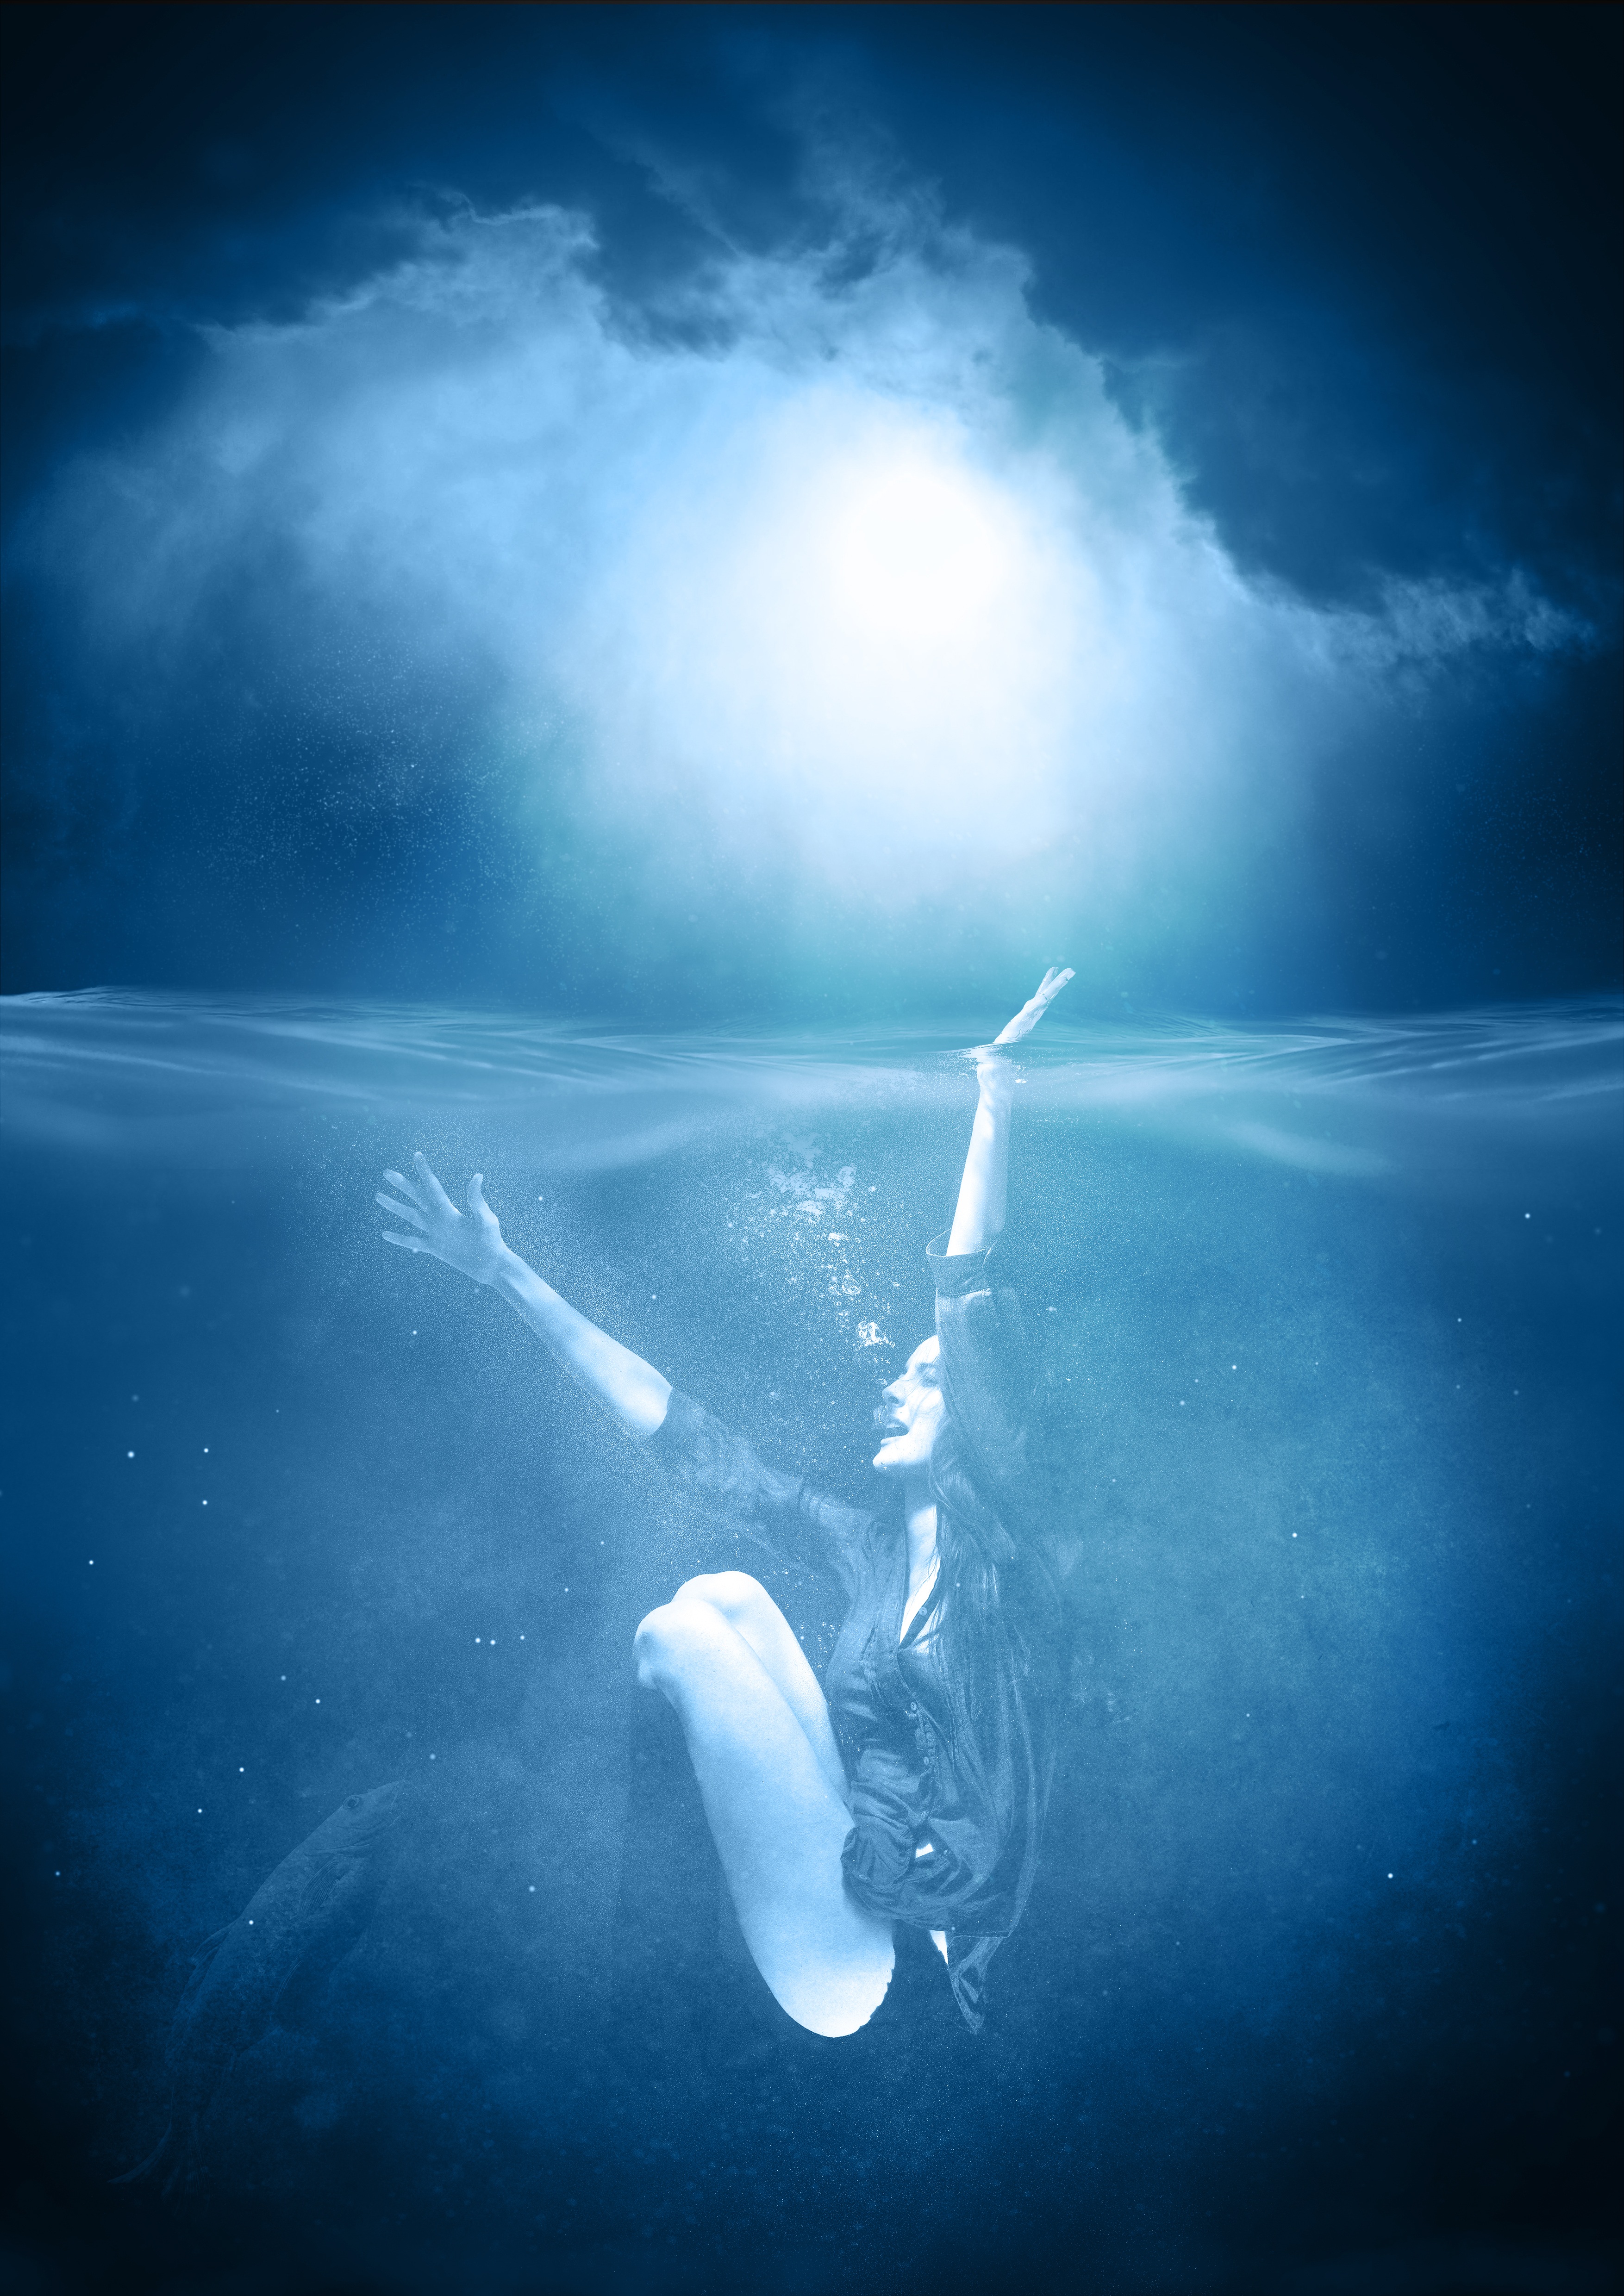 Woman sinking into depths